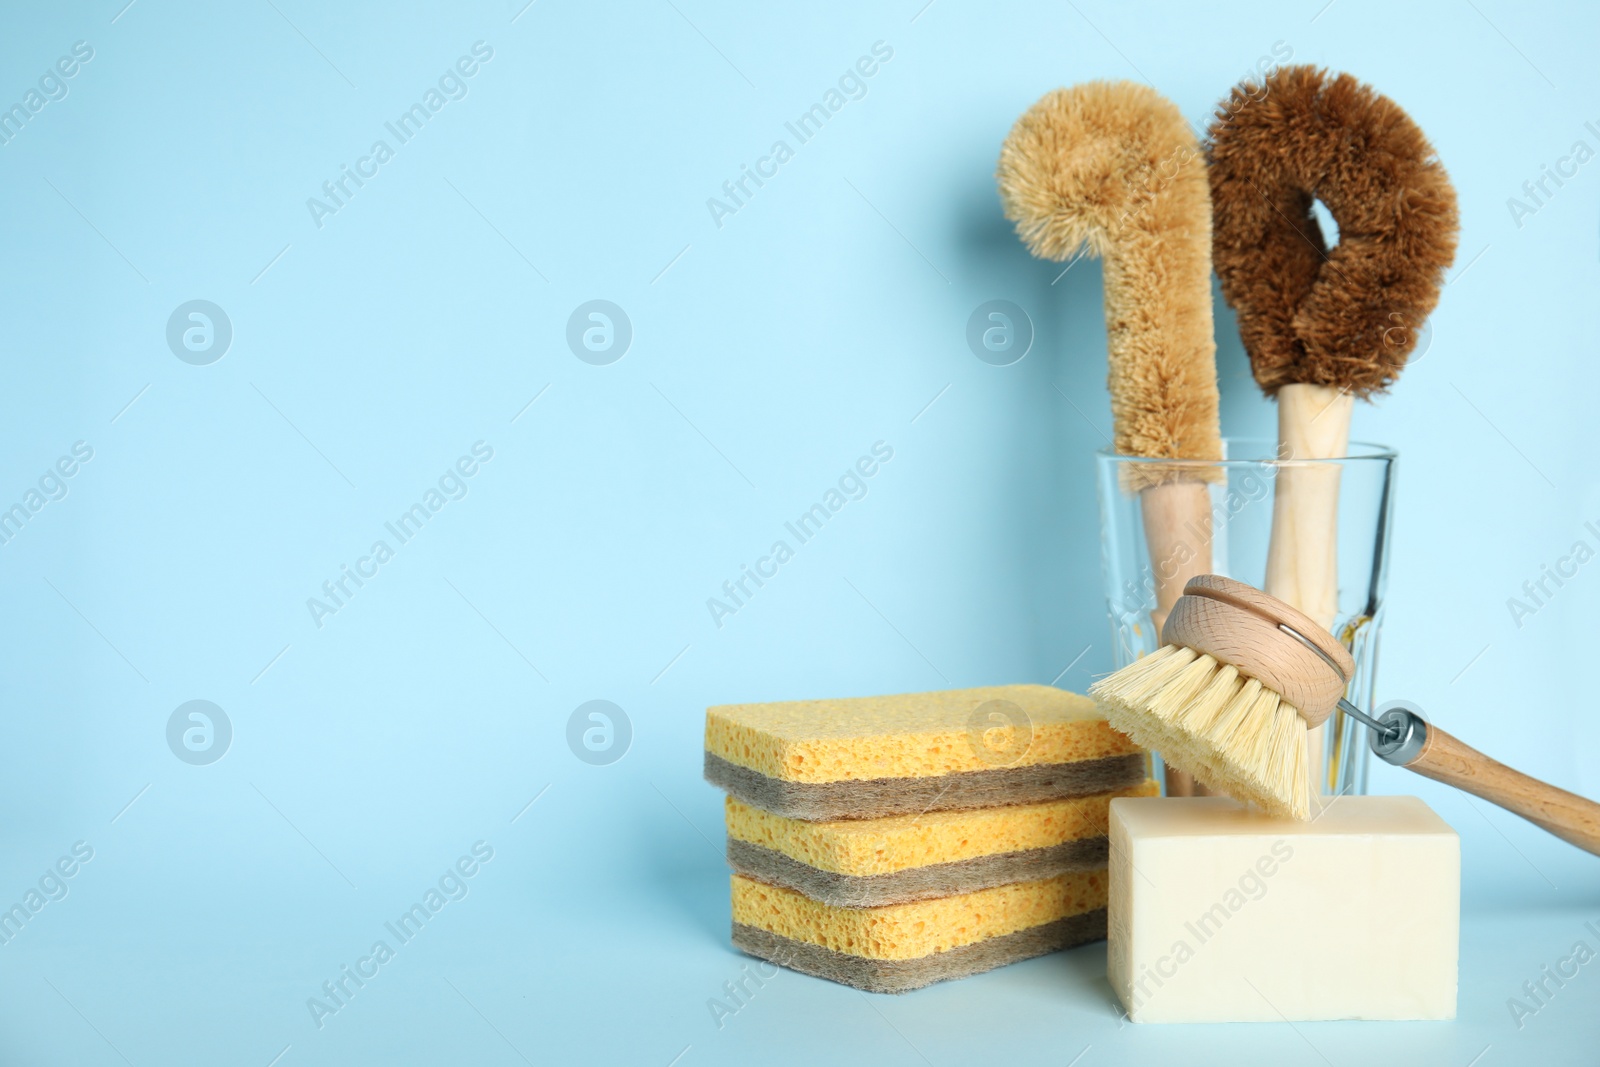 Photo of Cleaning tools on light blue background, space for text. Dish washing supplies